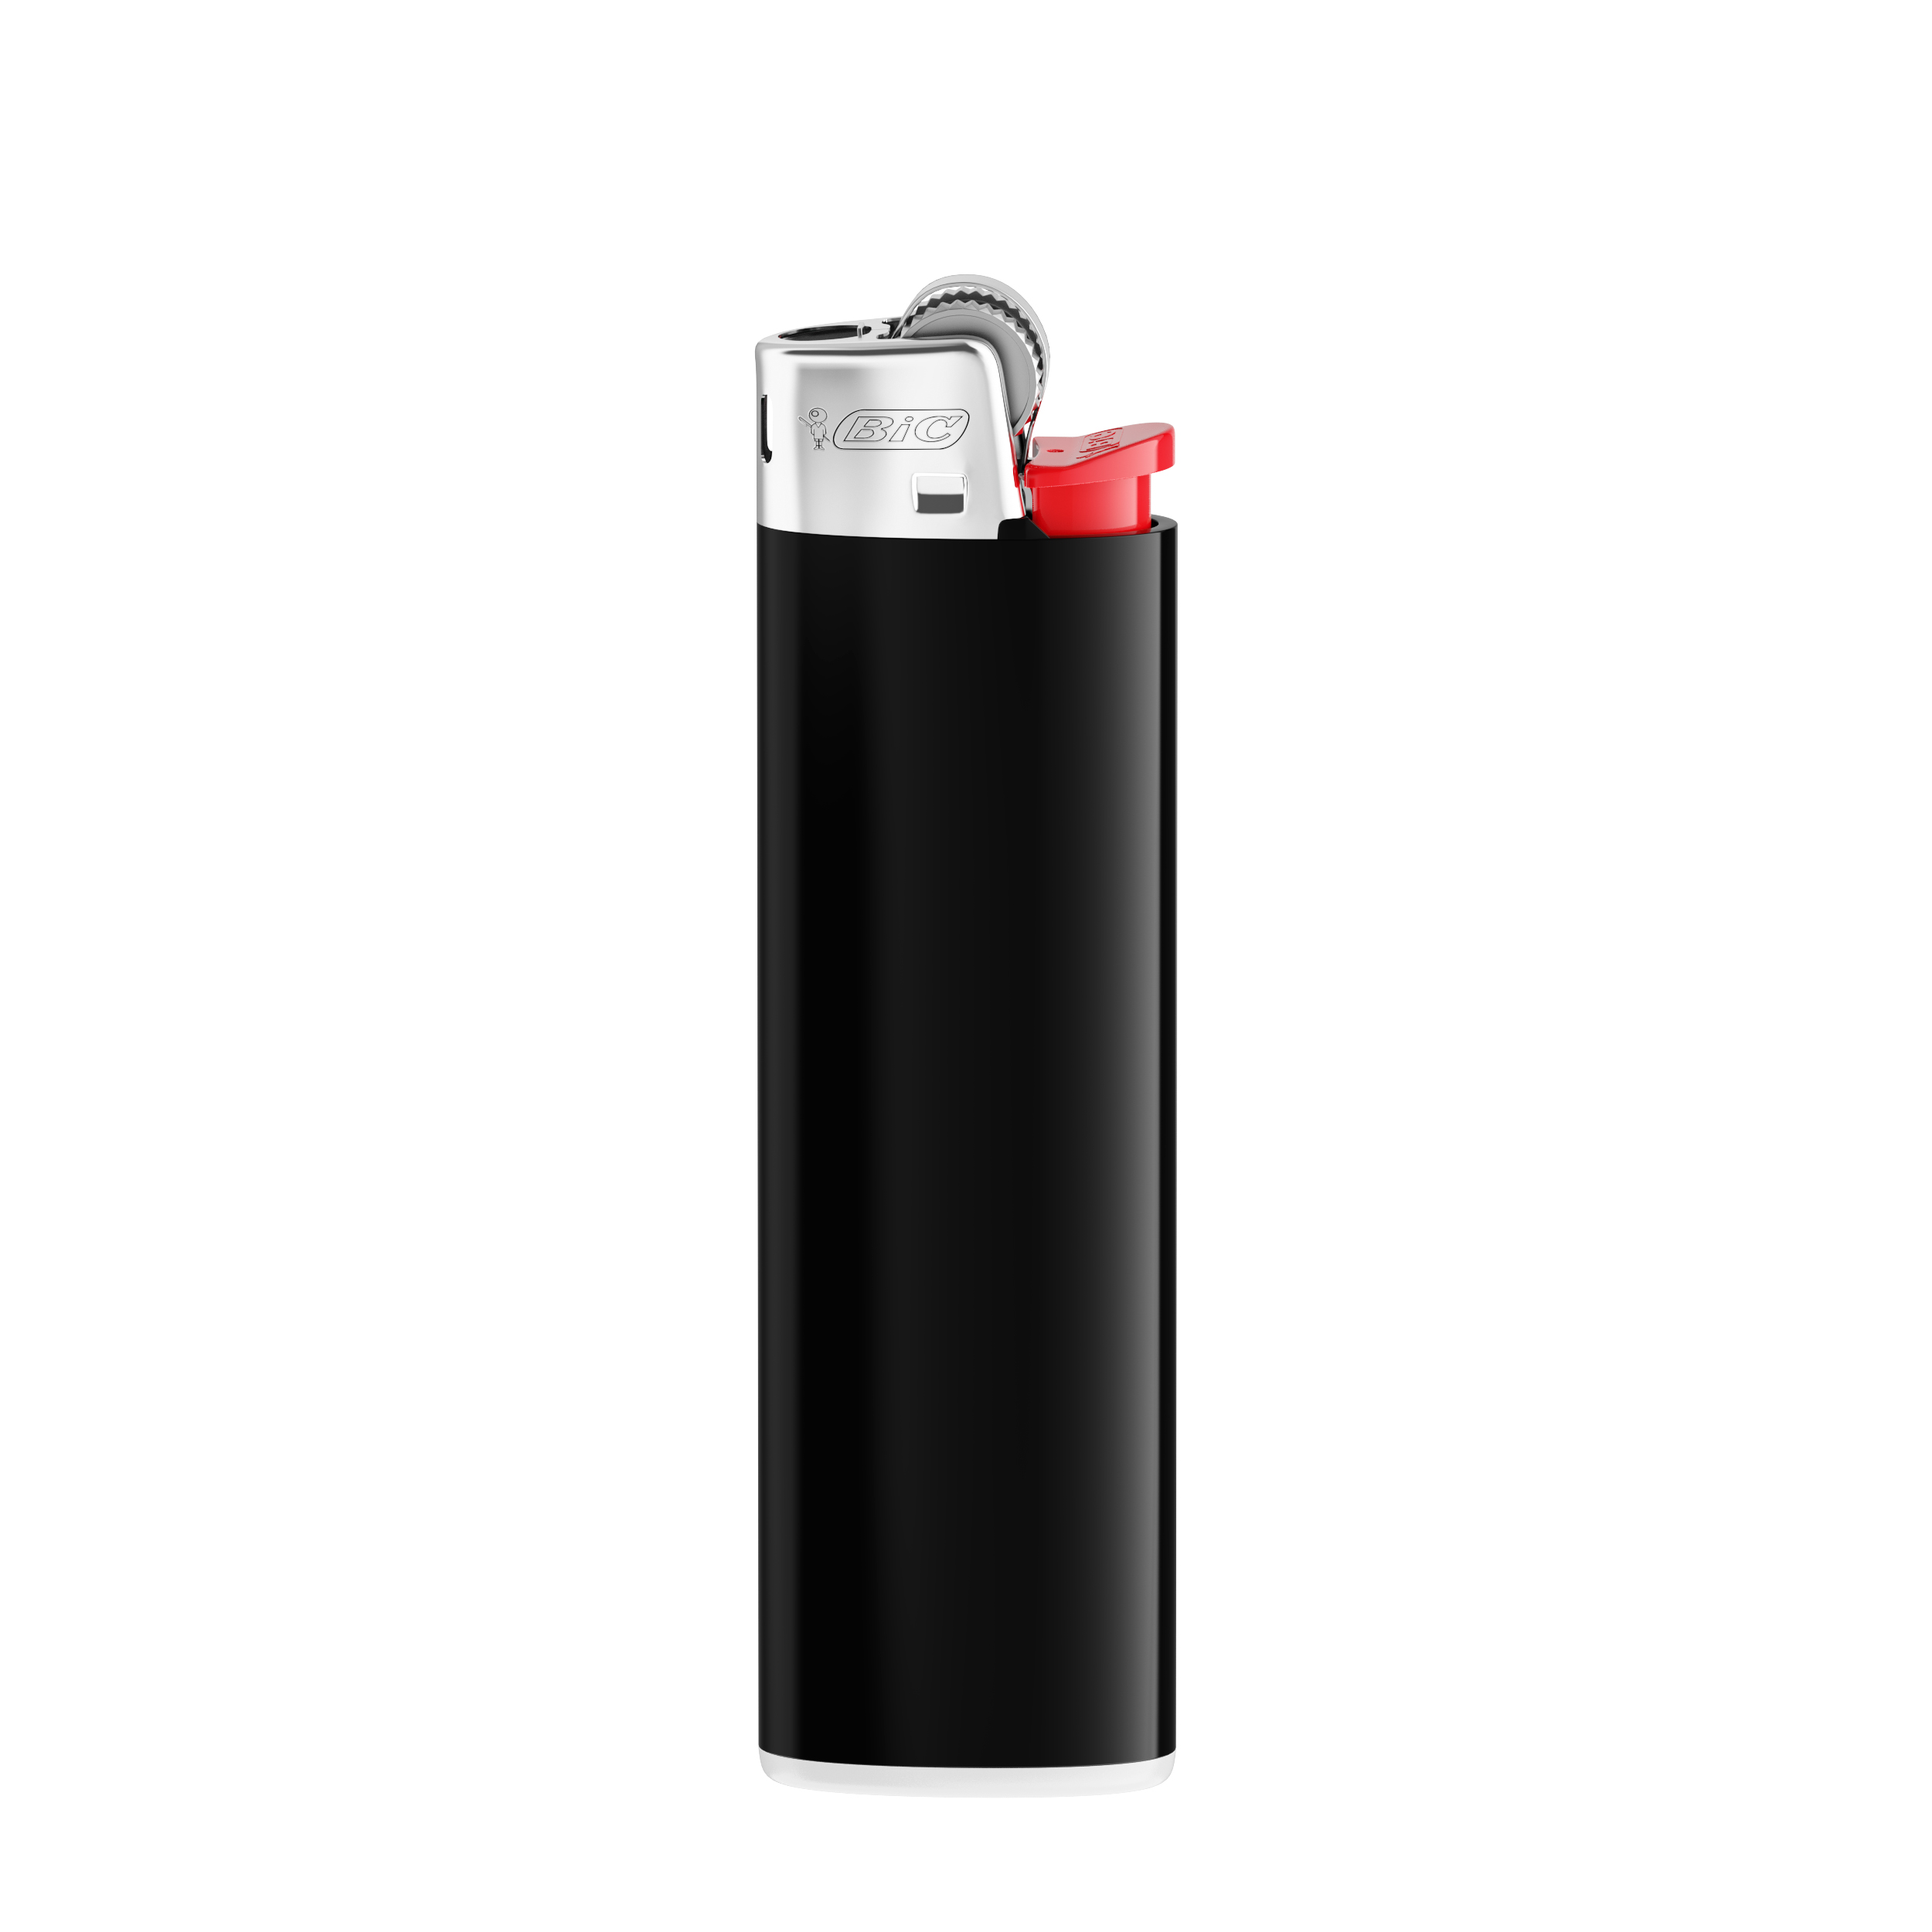 Briquet Made In France blanc